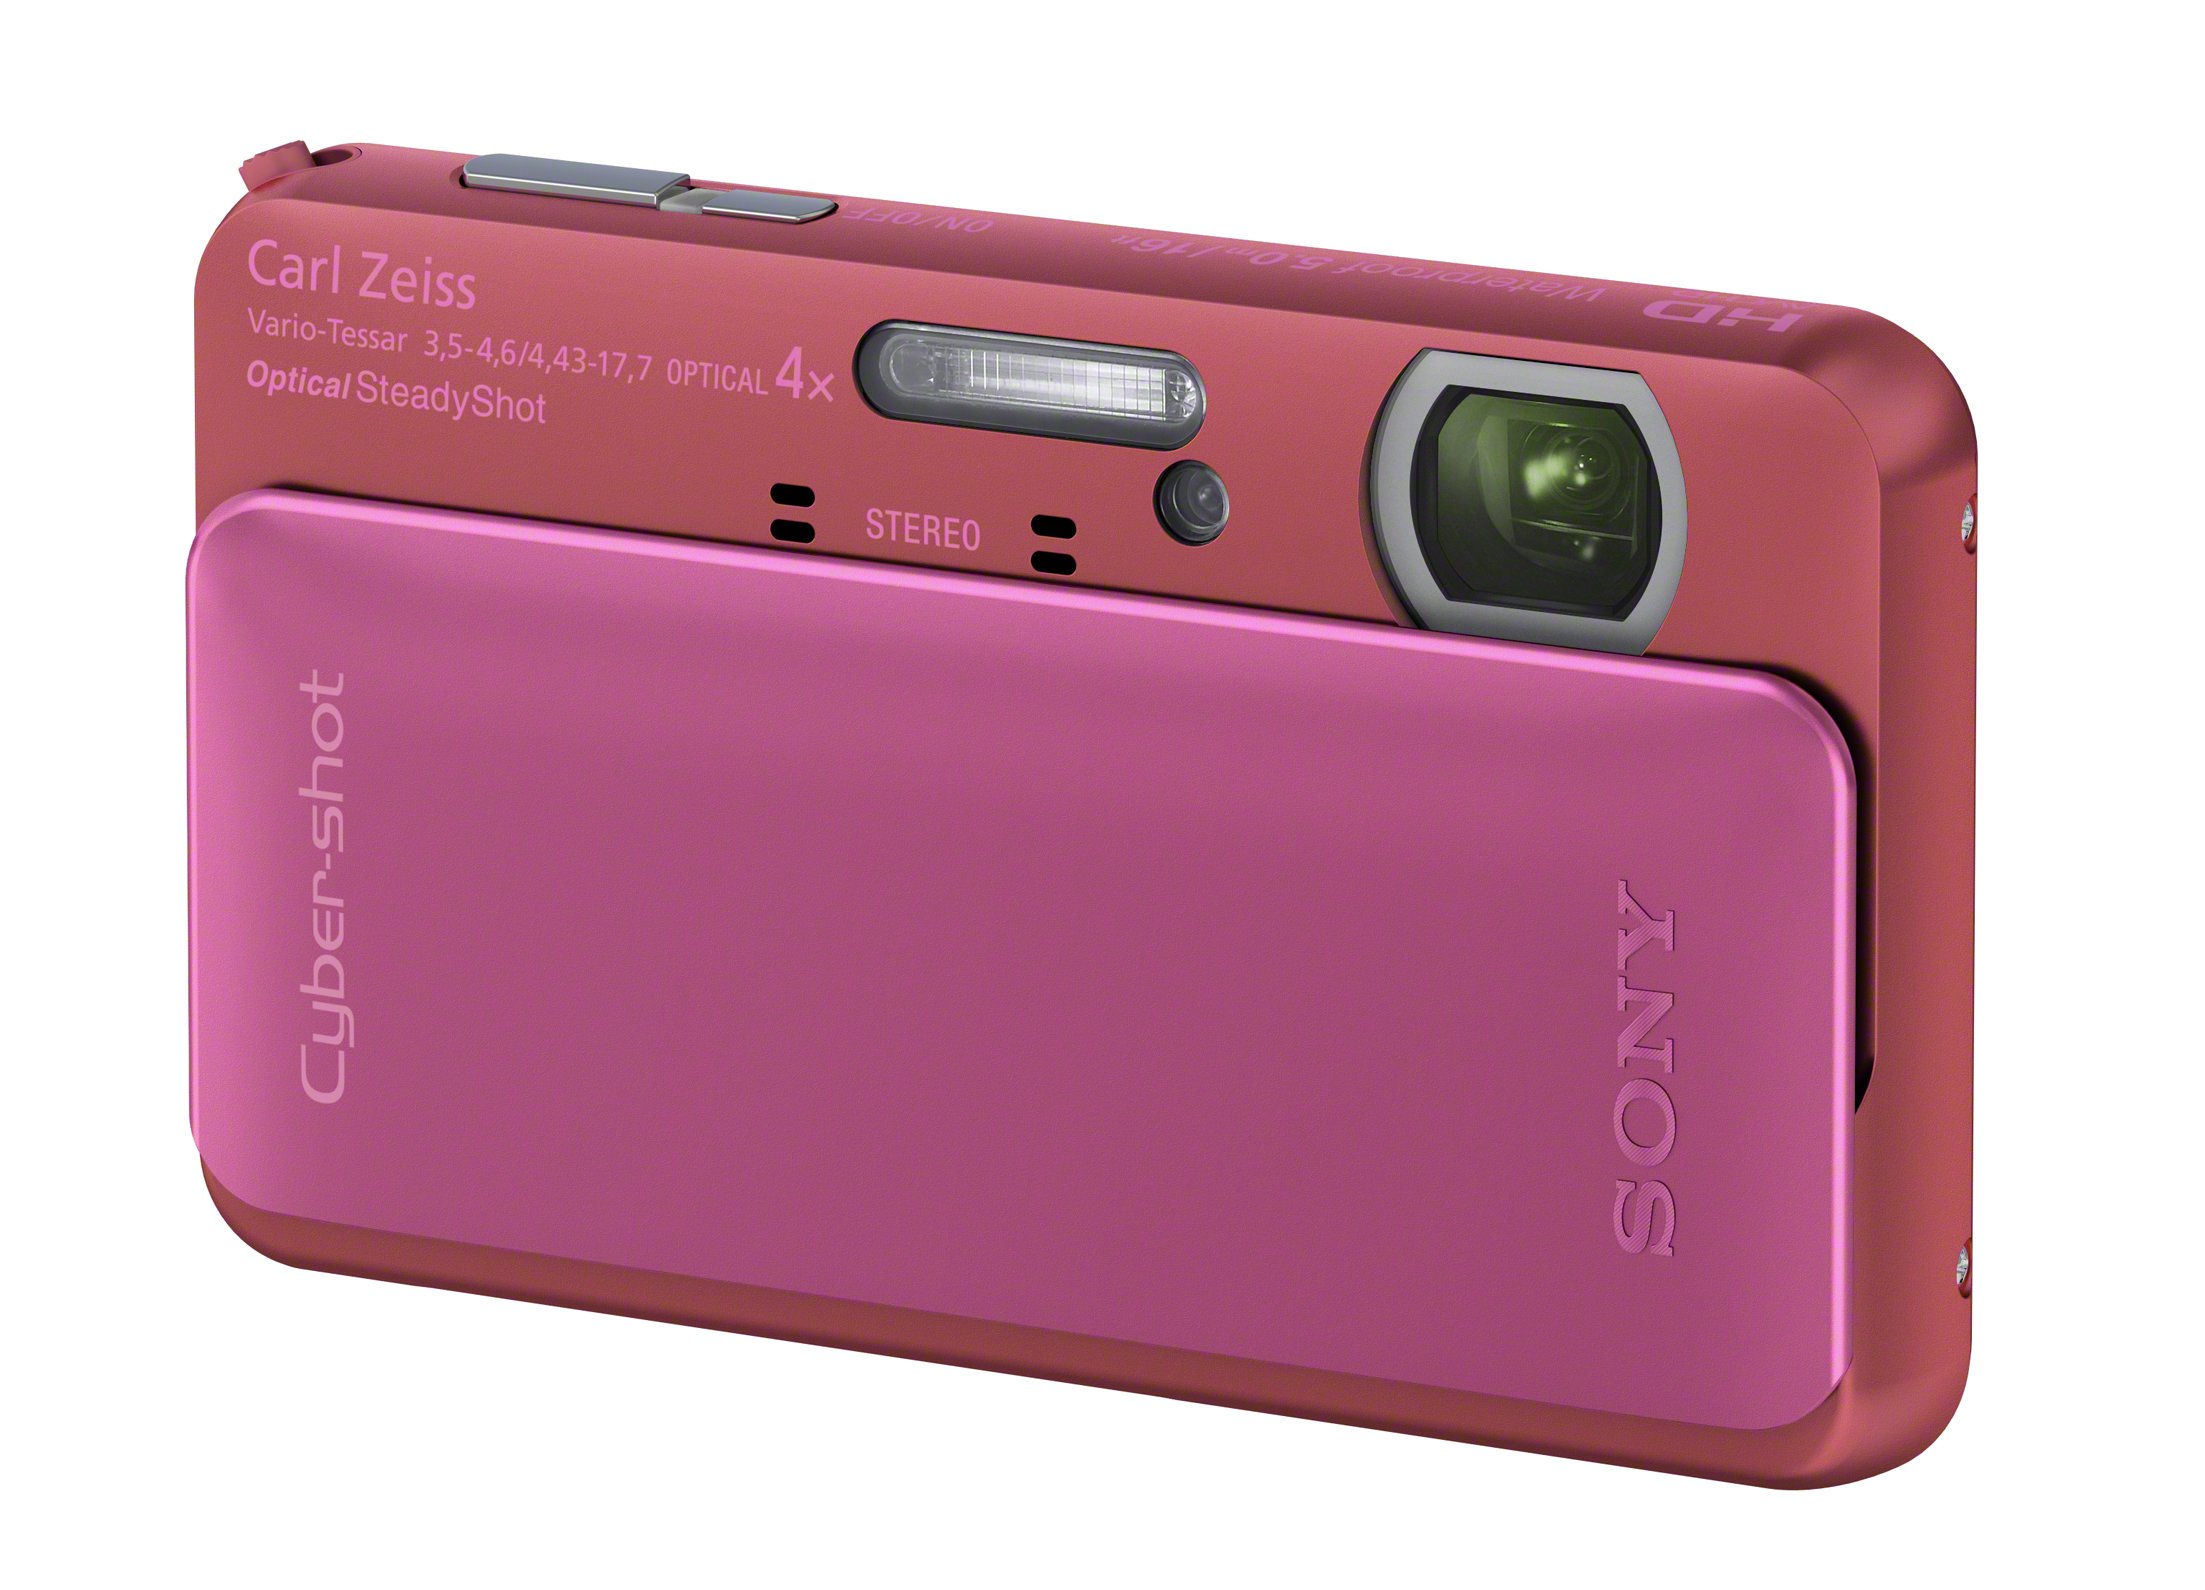 Sony Cyber-shot DSC-TX20 16.2 MP Exmor R CMOS Digital Camera with 4x Optical Zoom and 3.0-inch LCD (Pink) (2012 Model)